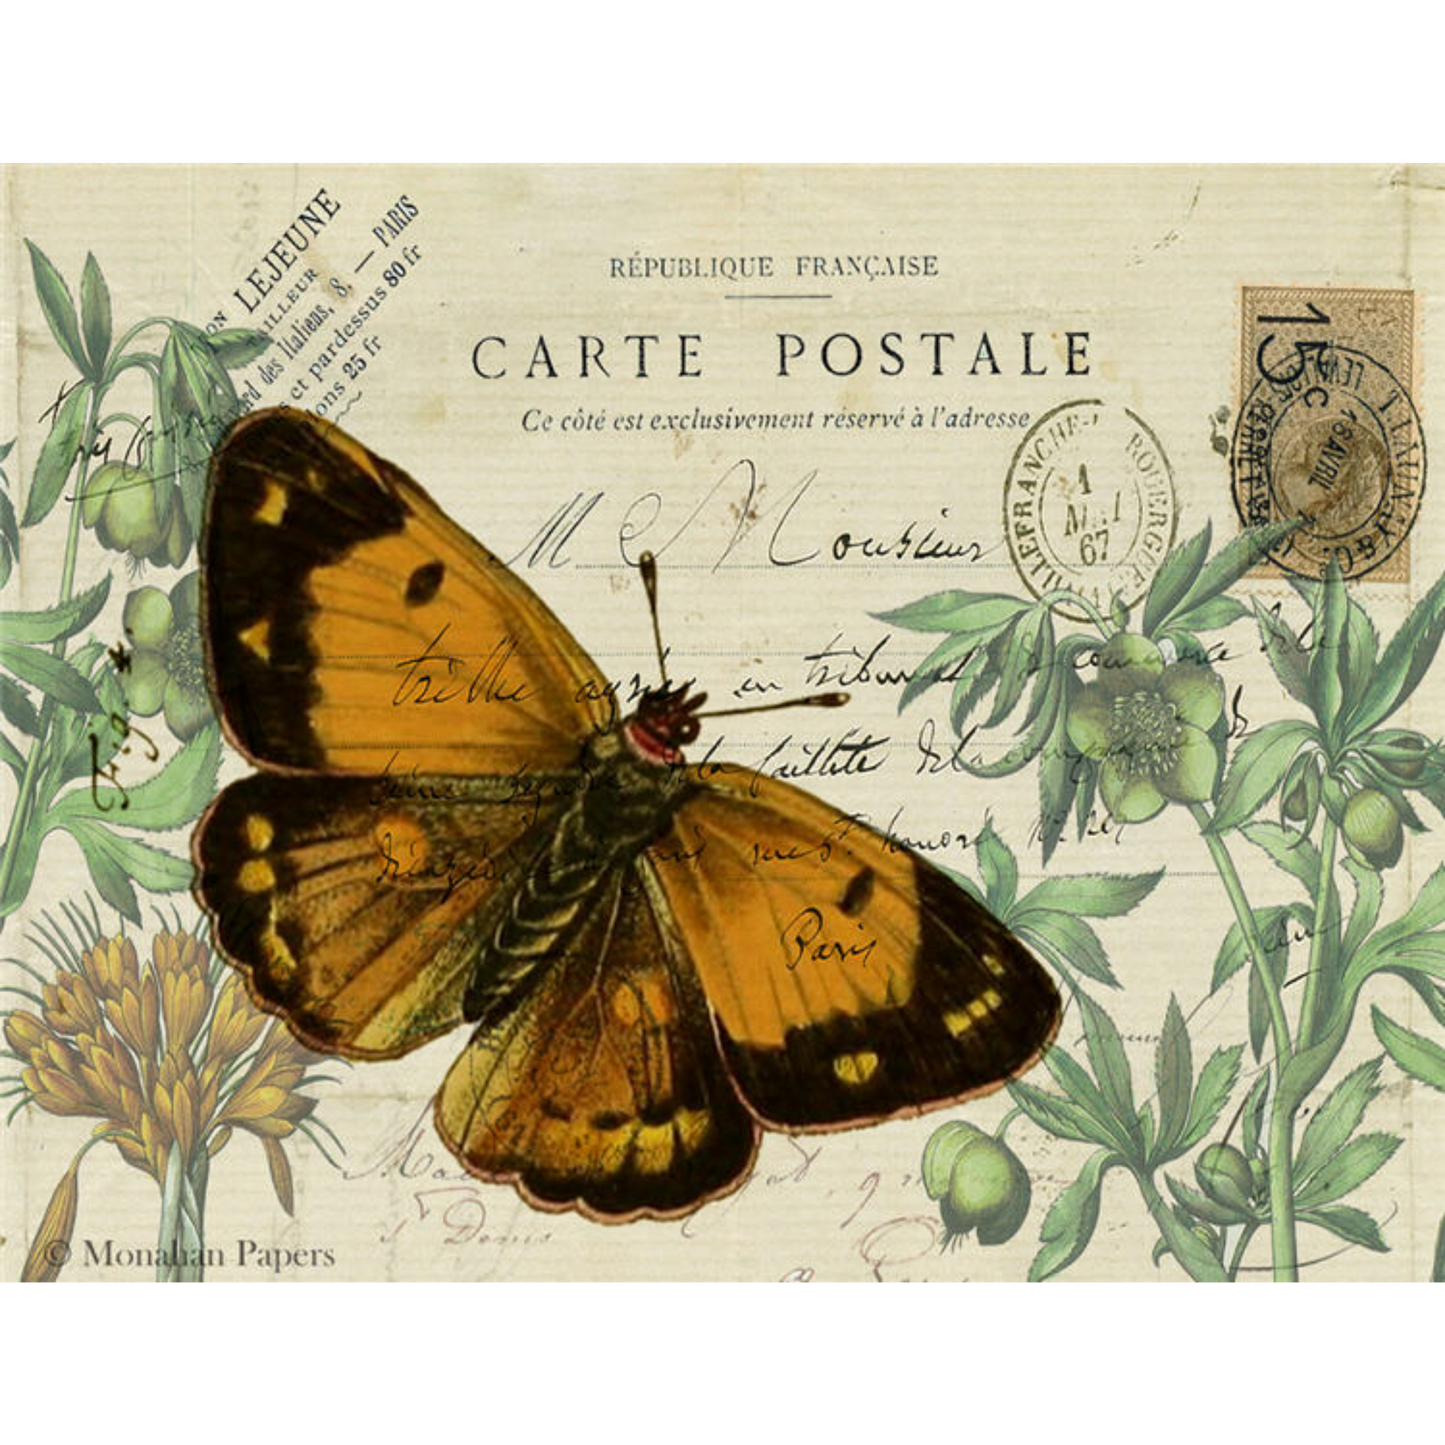 Orange Butterfly 11" x 17" decoupage paper by Monahan Papers available at Milton's Daughter